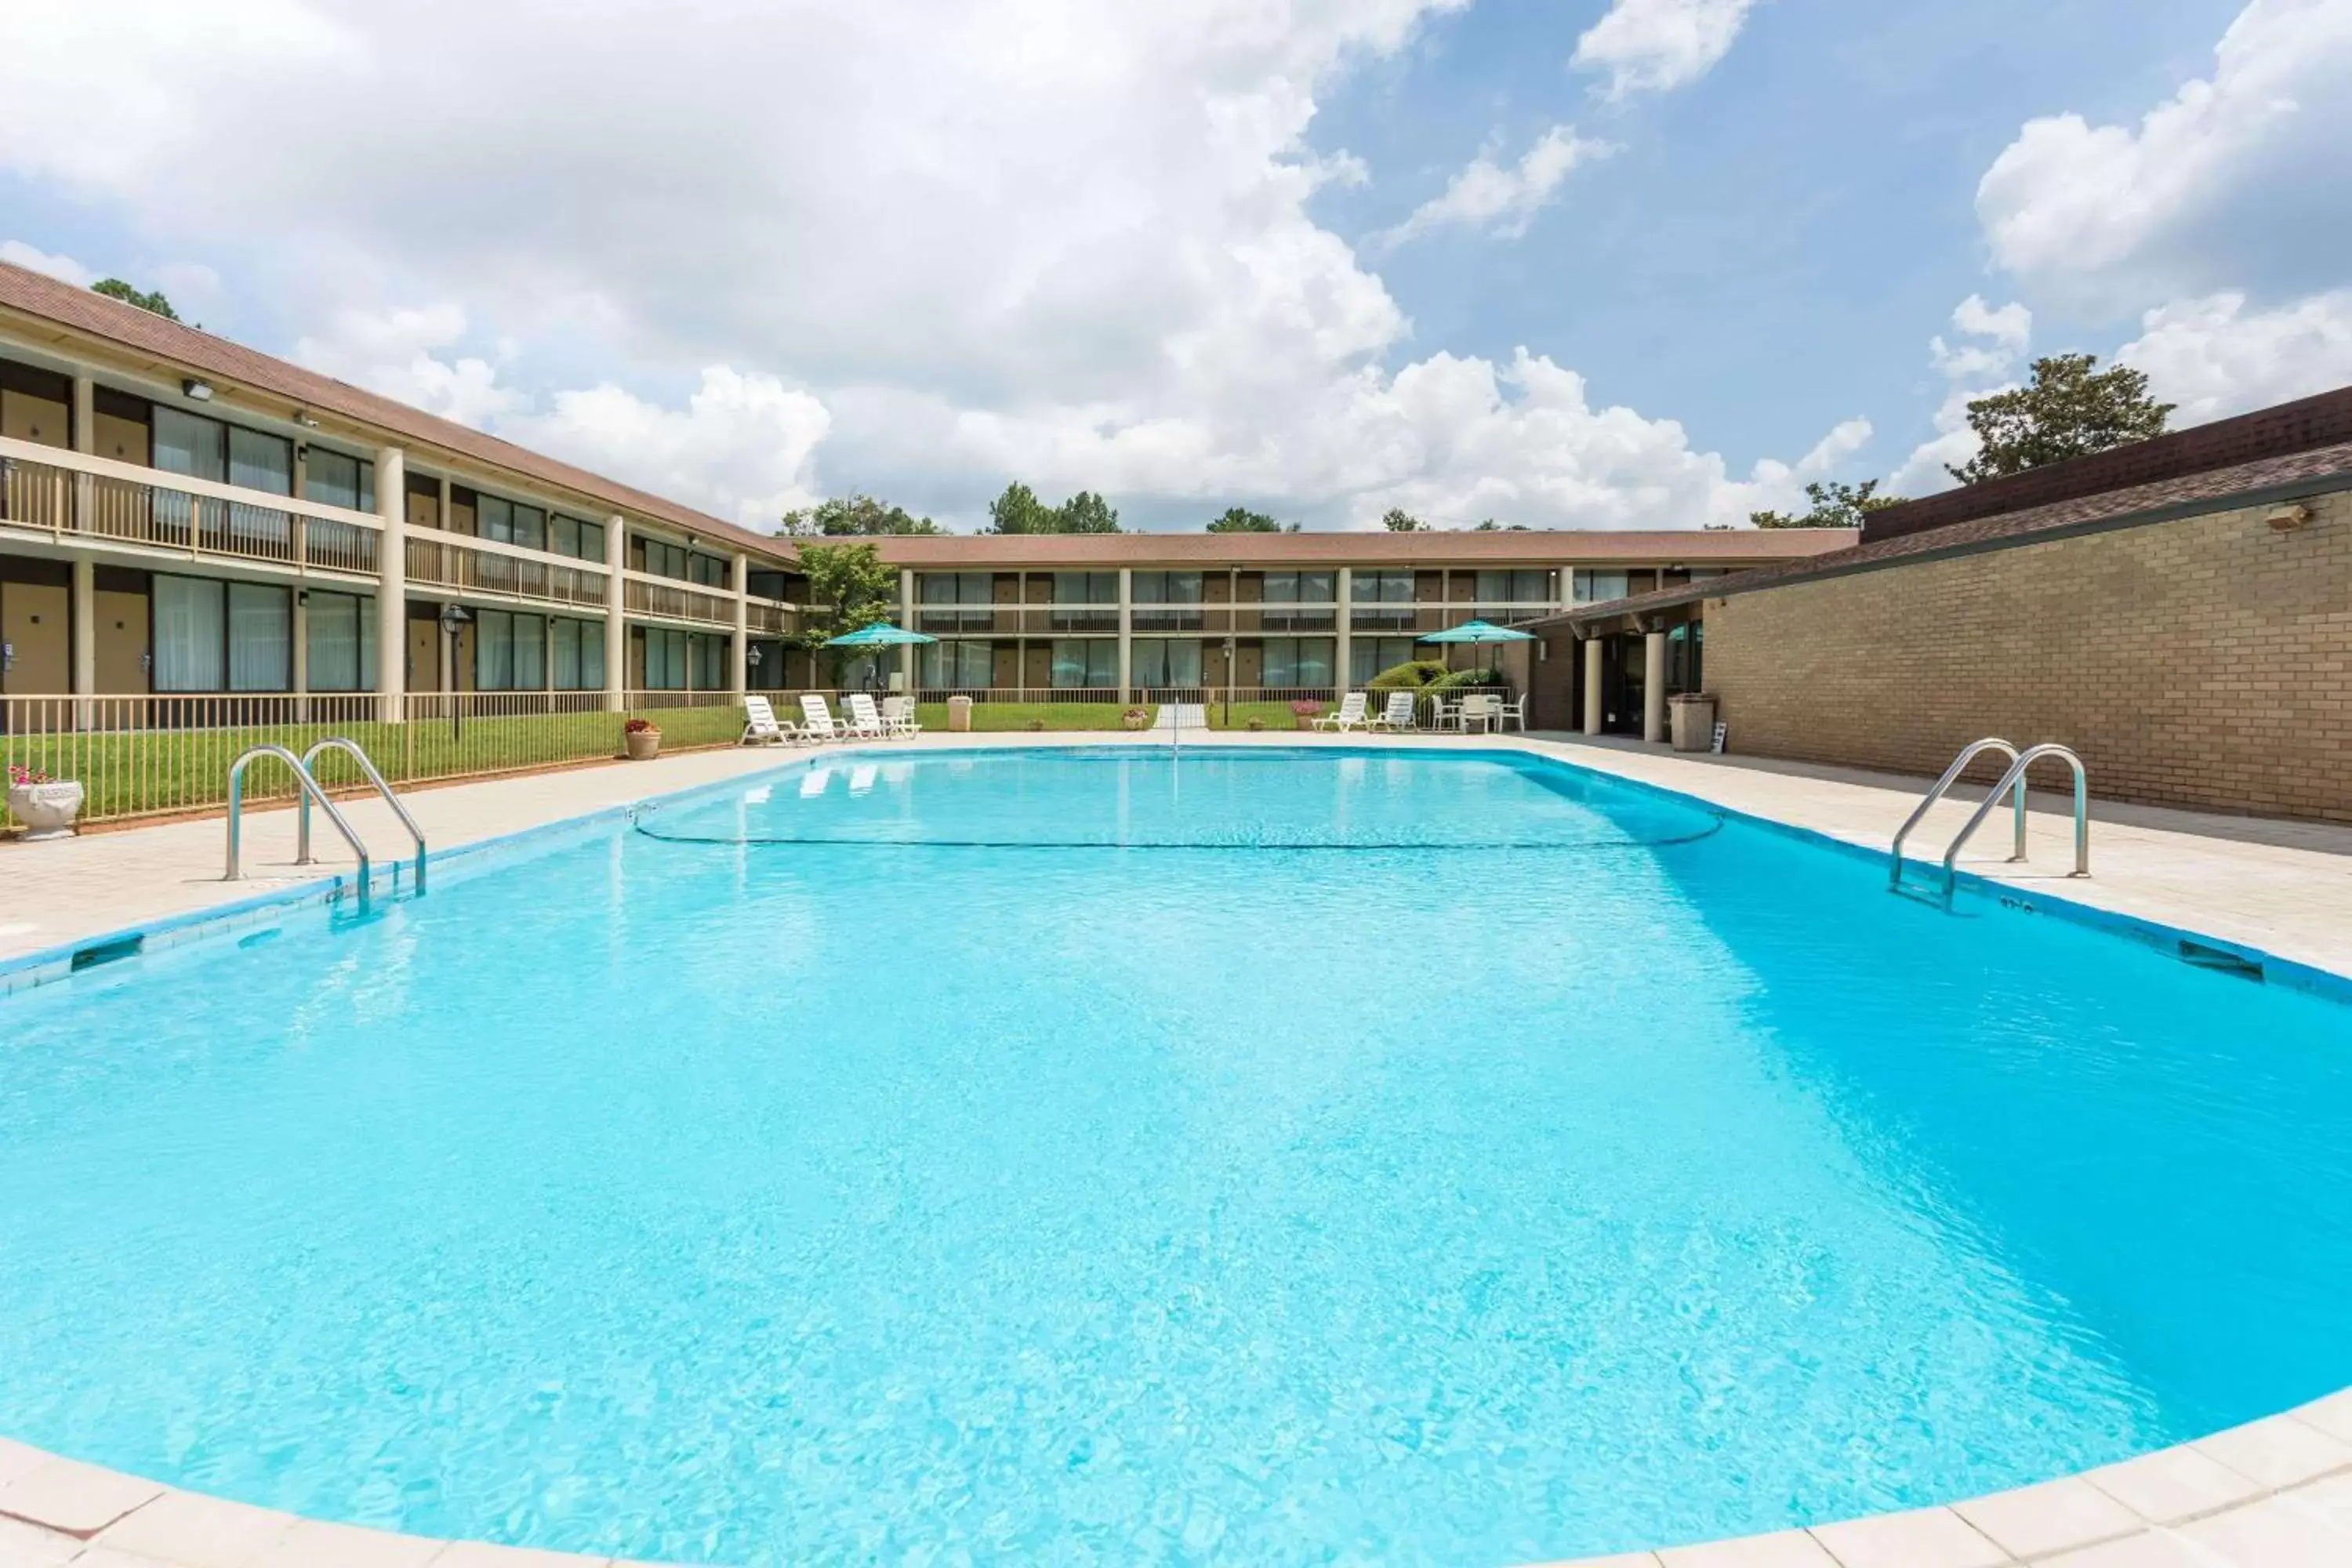 On site, Swimming Pool in Days Inn & Conf Center by Wyndham Southern Pines Pinehurst